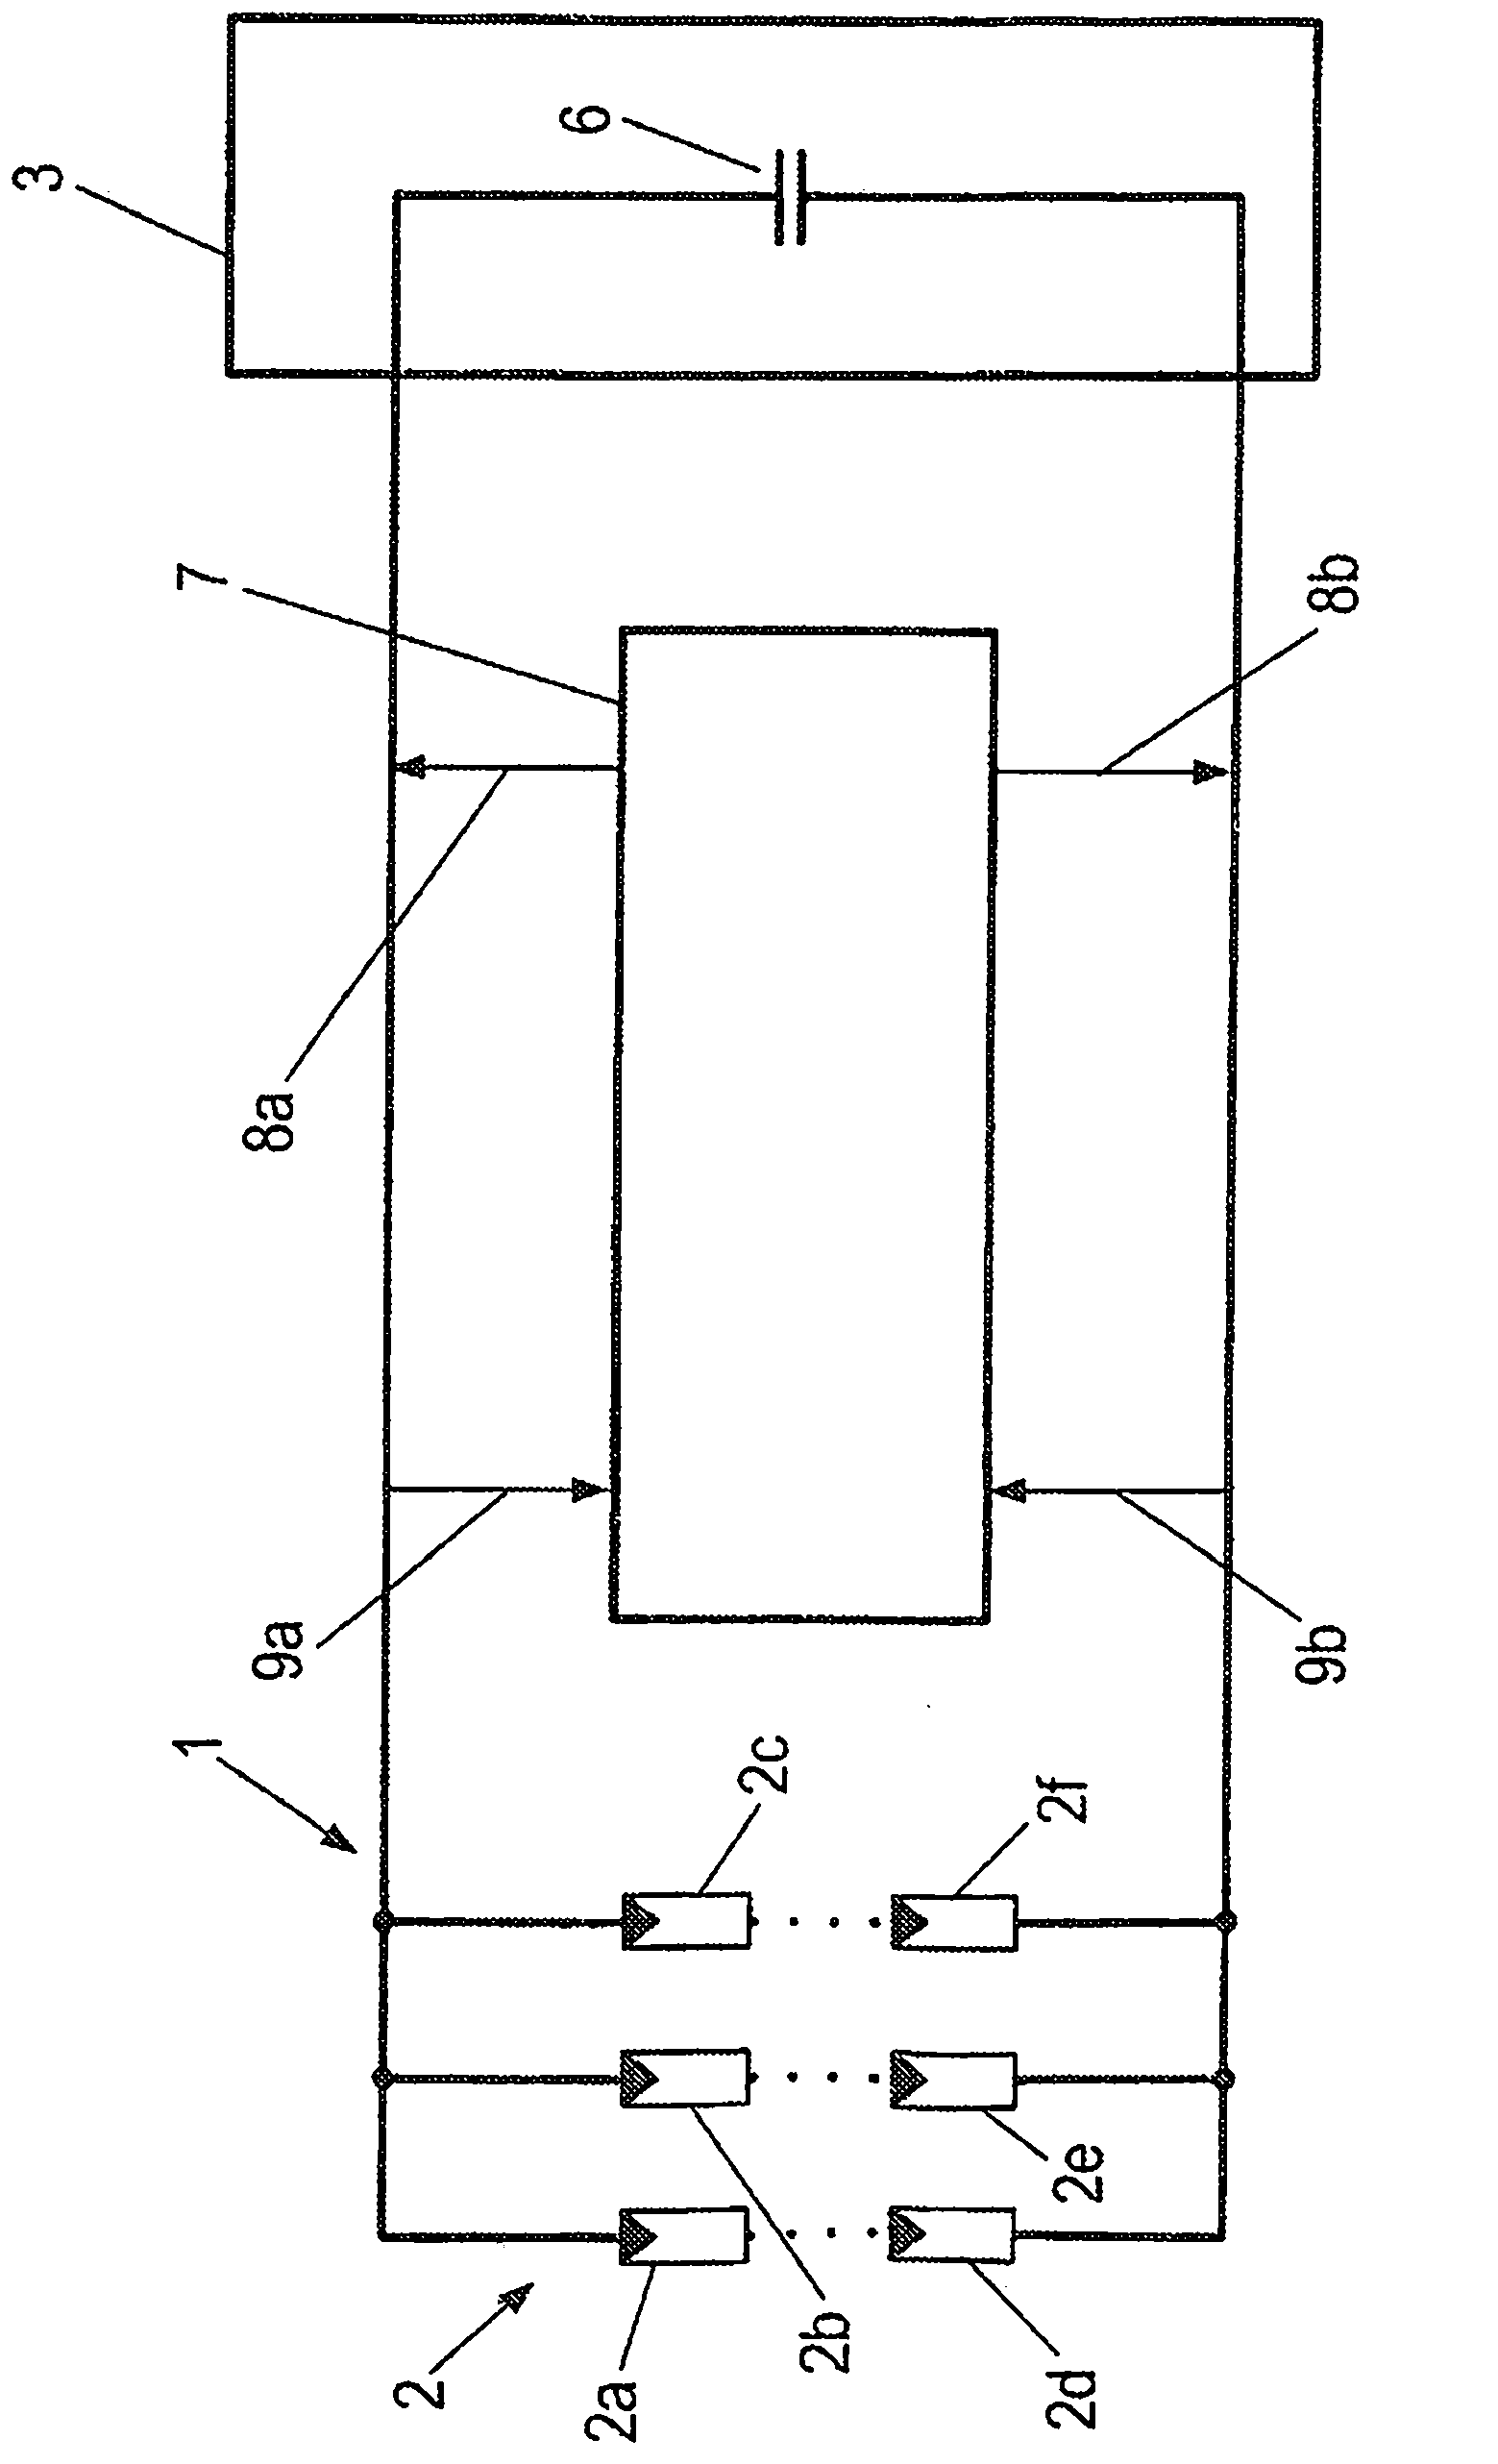 Device and method for monitoring a photovoltaic system